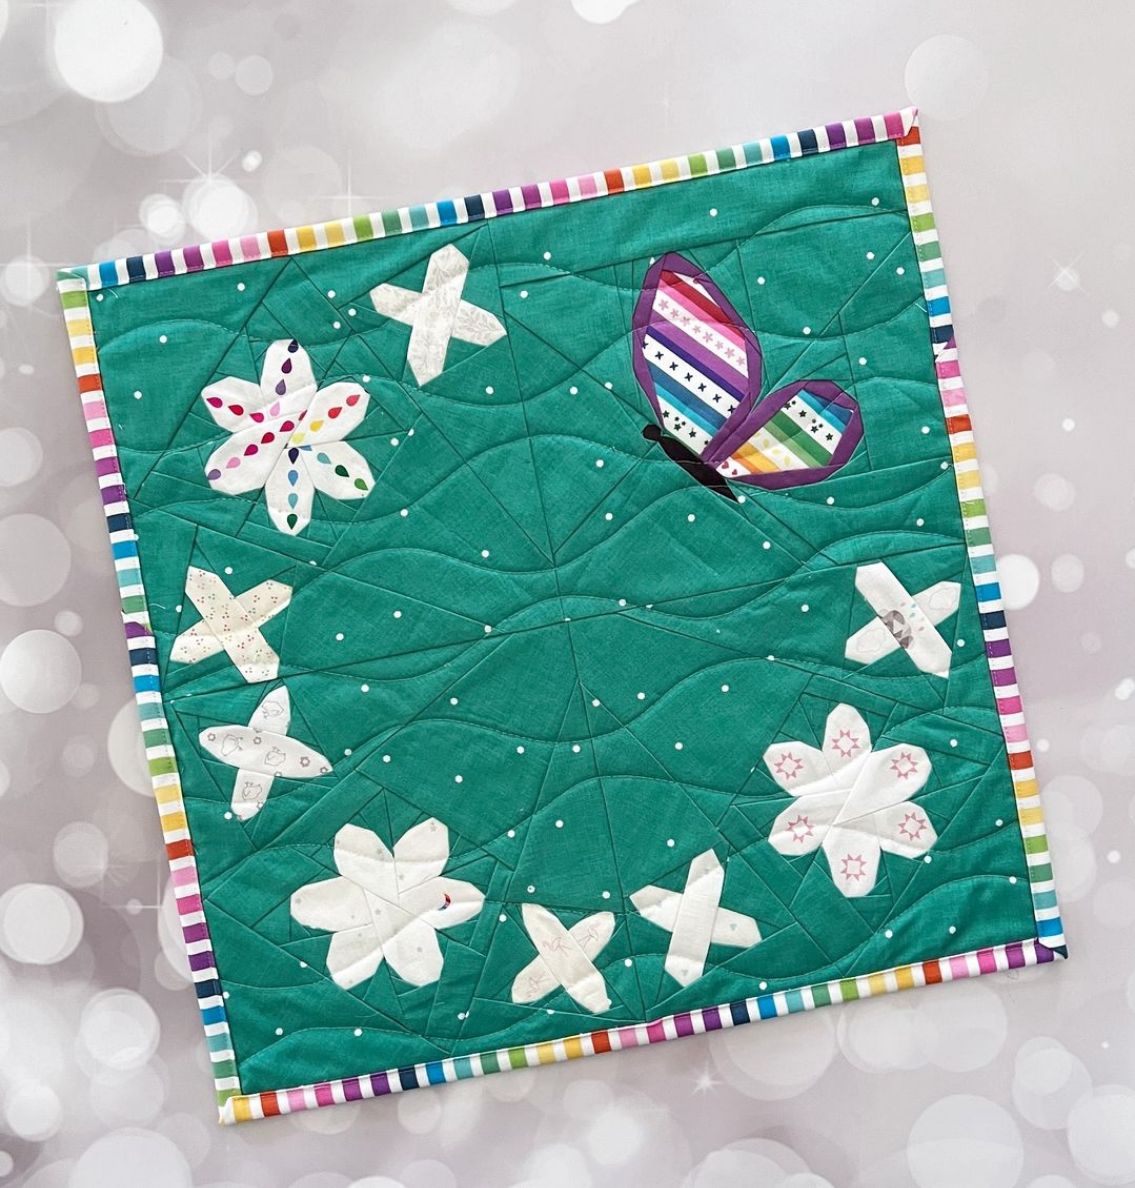 Ready for some Mini Quilt Magic?